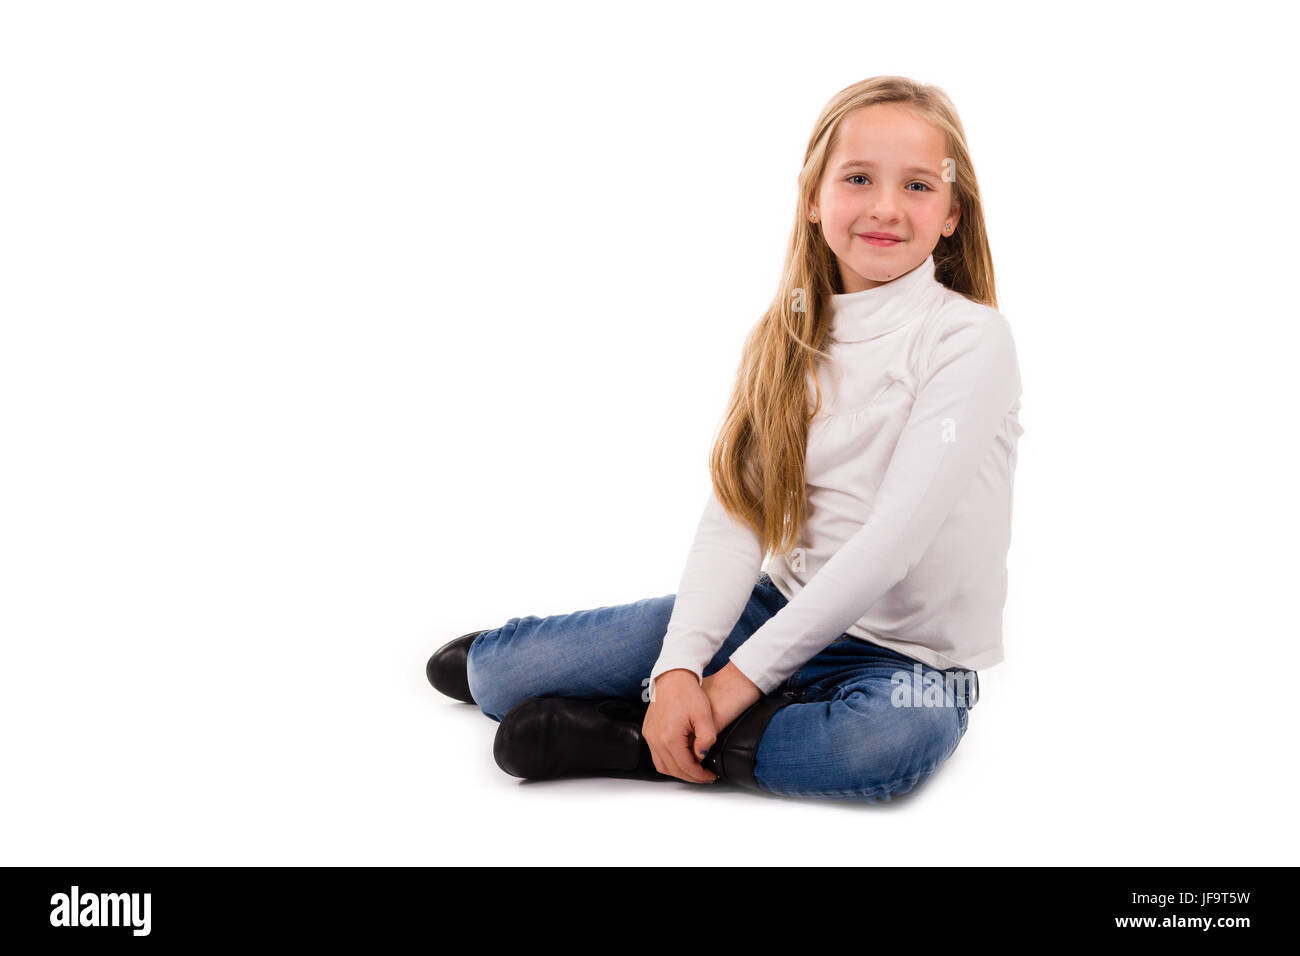 Portrait of a pretty young girl with long blonde hair isolated on a white background Stock Photo